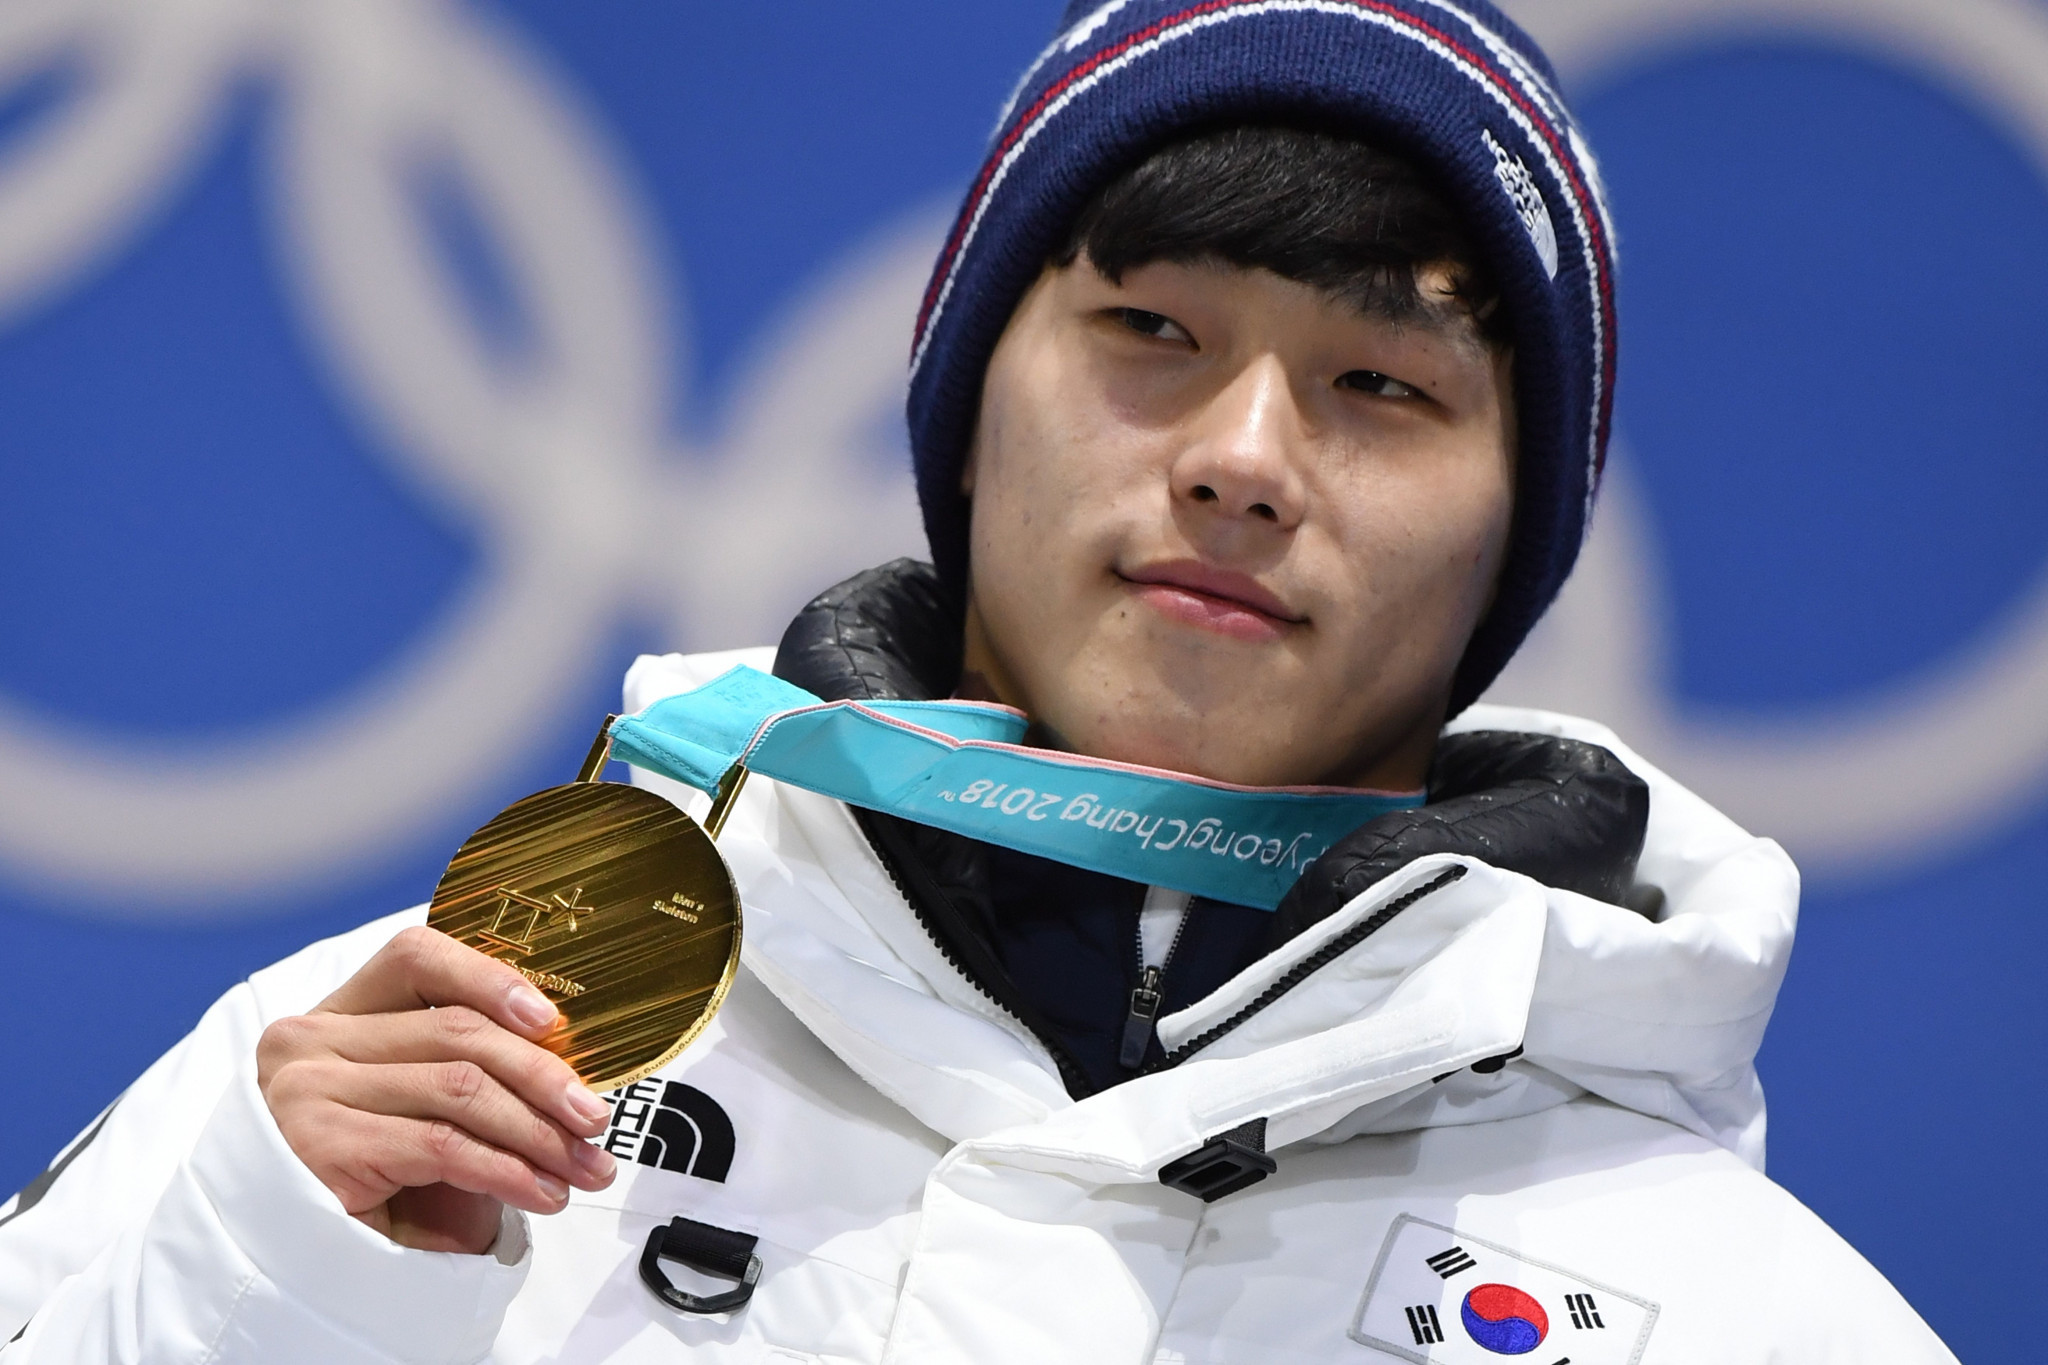 Olympic champion Sungbin Yun of South Korea will look to extend his lead at the IBSF World Cup event in Lake Placid ©Getty Images